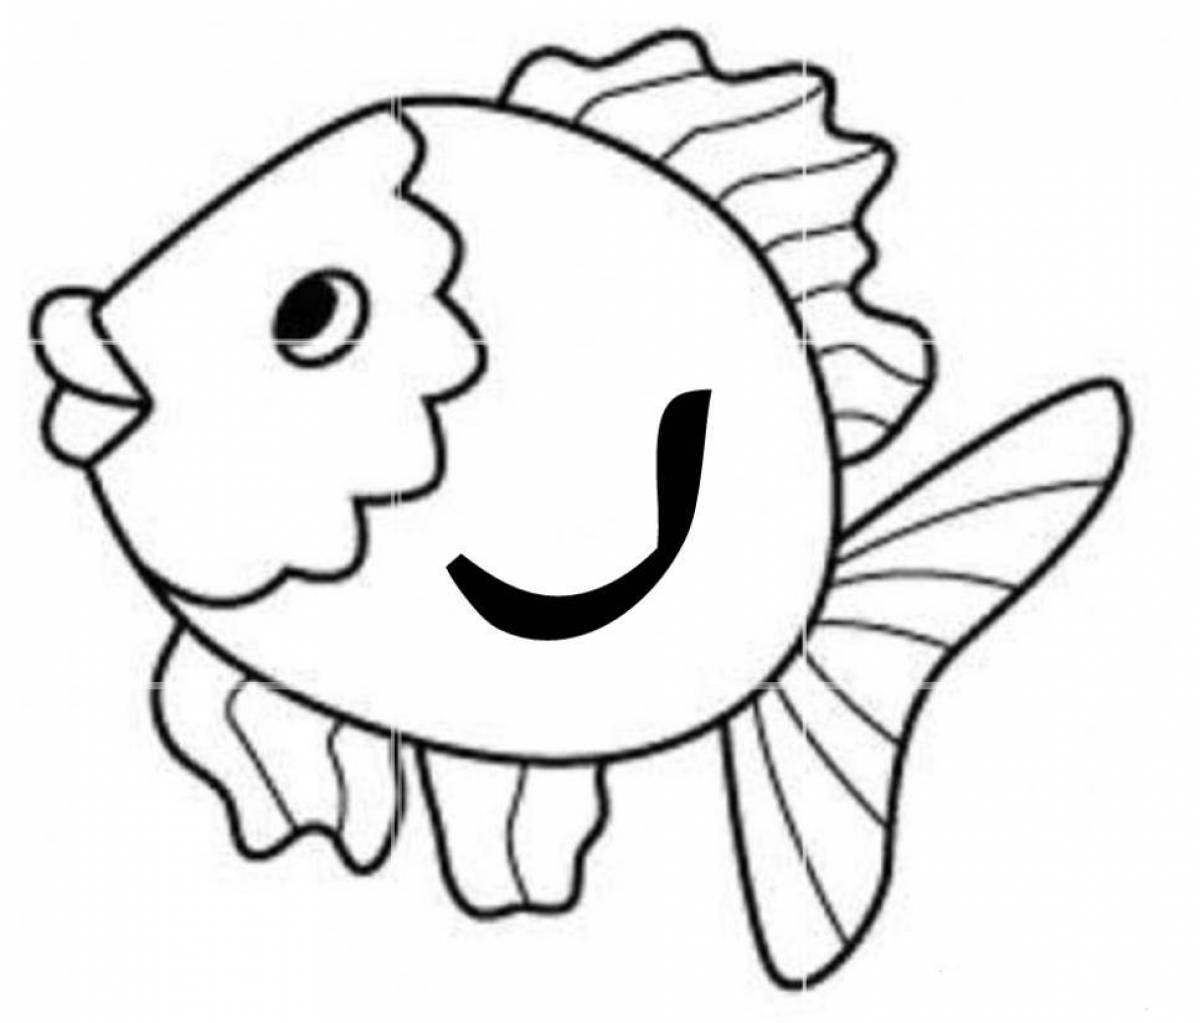 Coloring page gentle fish pattern